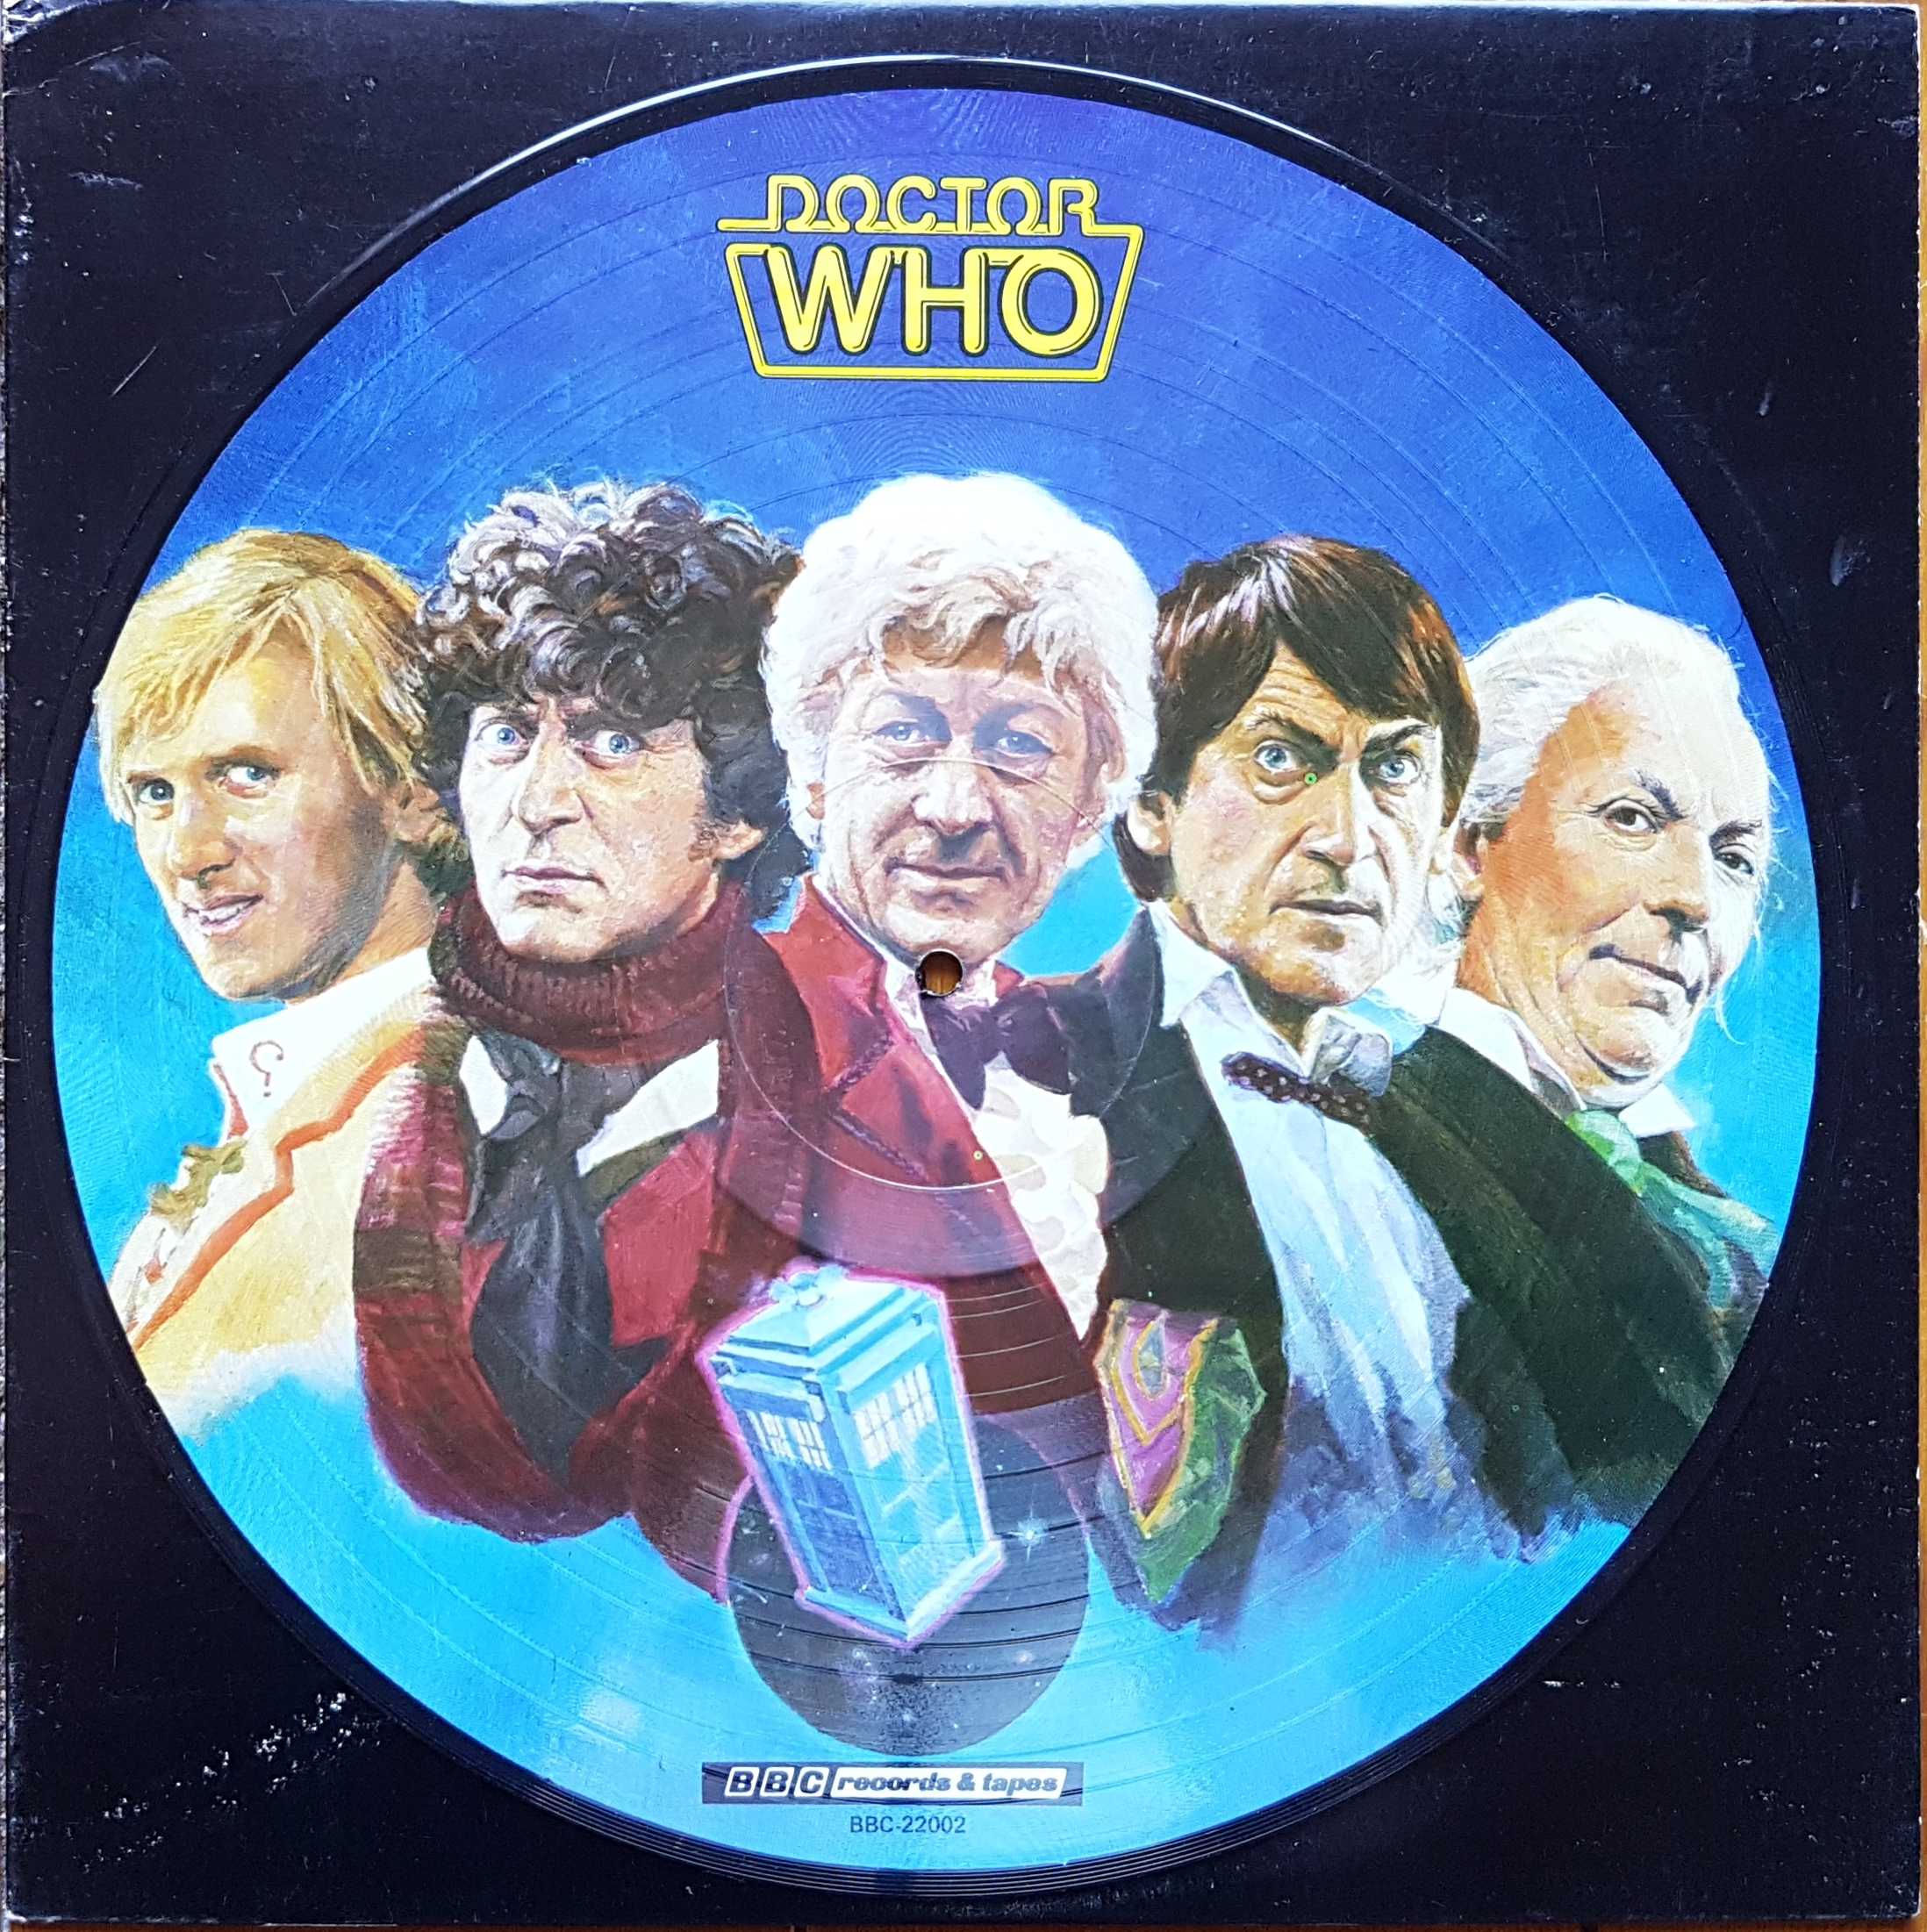 Picture of Doctor Who the music by artist Various from the BBC albums - Records and Tapes library